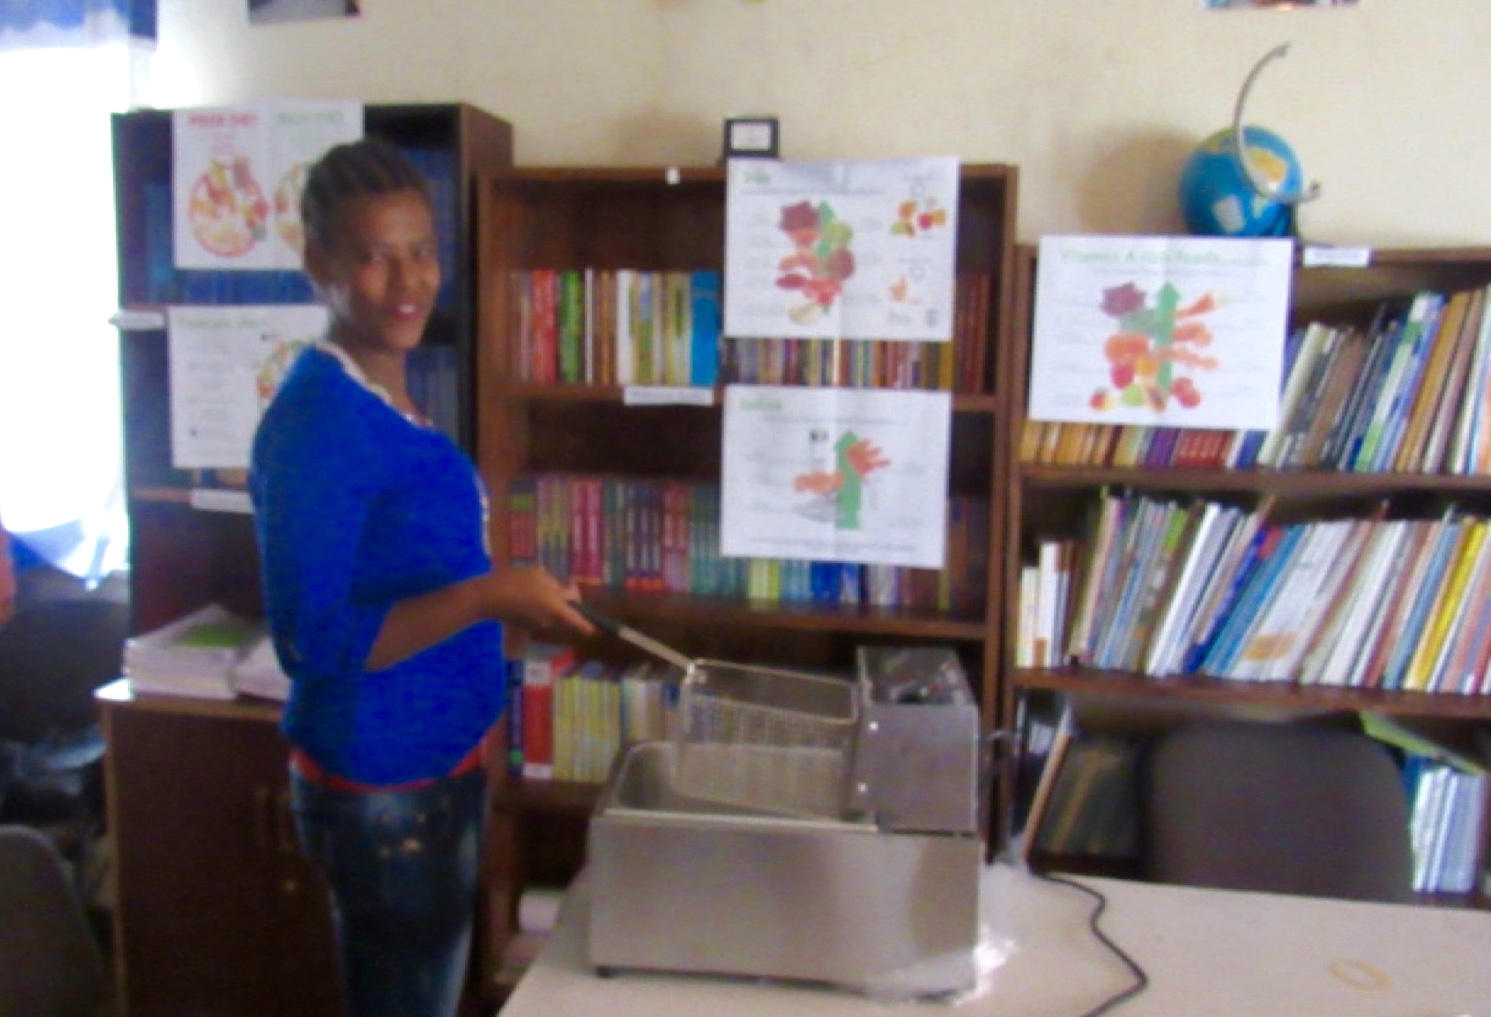 Handing over equipment to one of the livelihoods beneficiaries in Addis Ababa after the successful submittal of her business plan (1).jpg